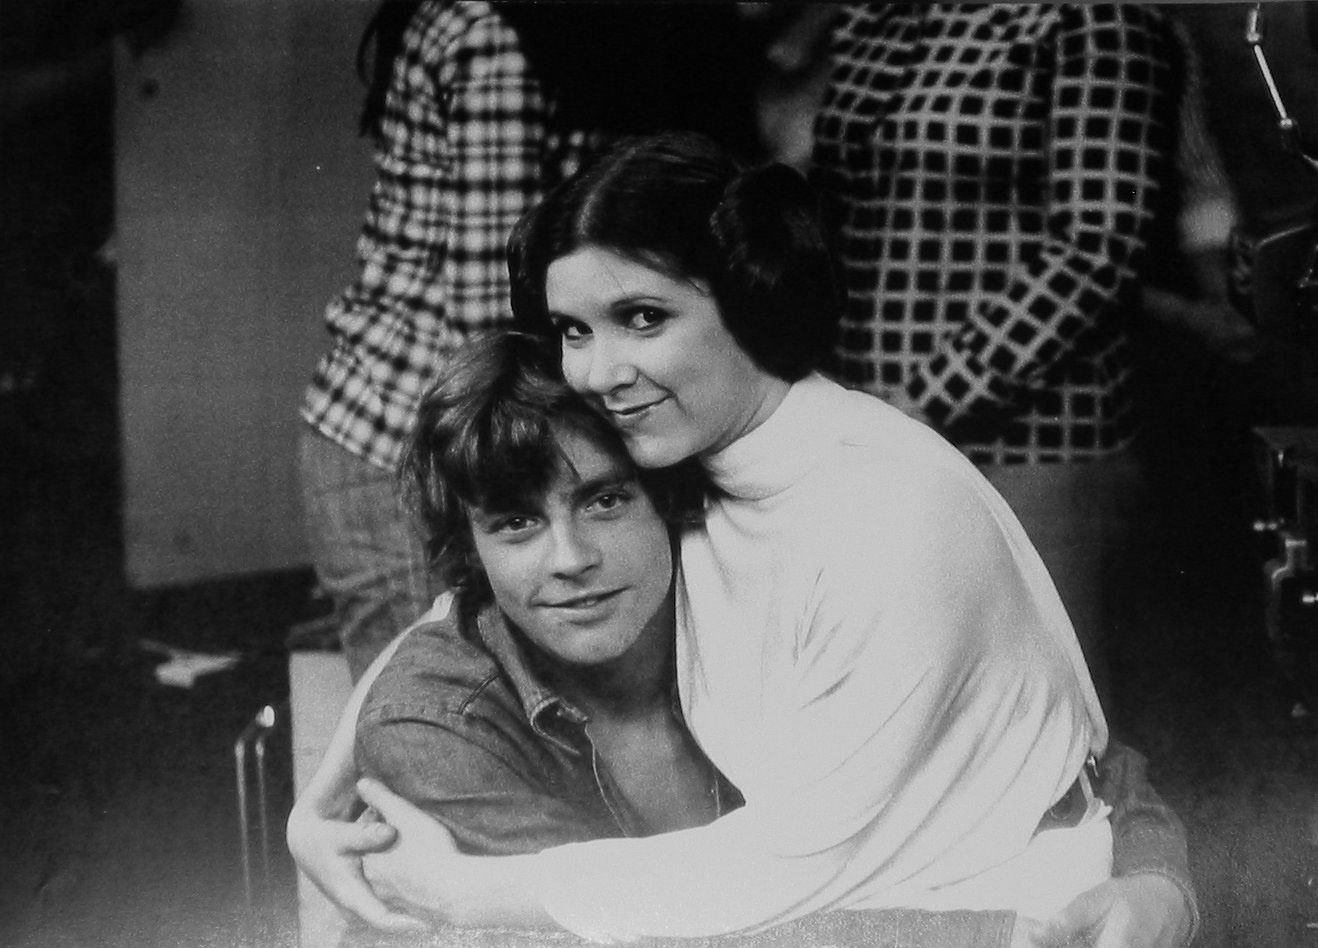 50 Star Wars Behind the Scenes Images From Not So Long Ago… in a Galaxy Not So Far Away